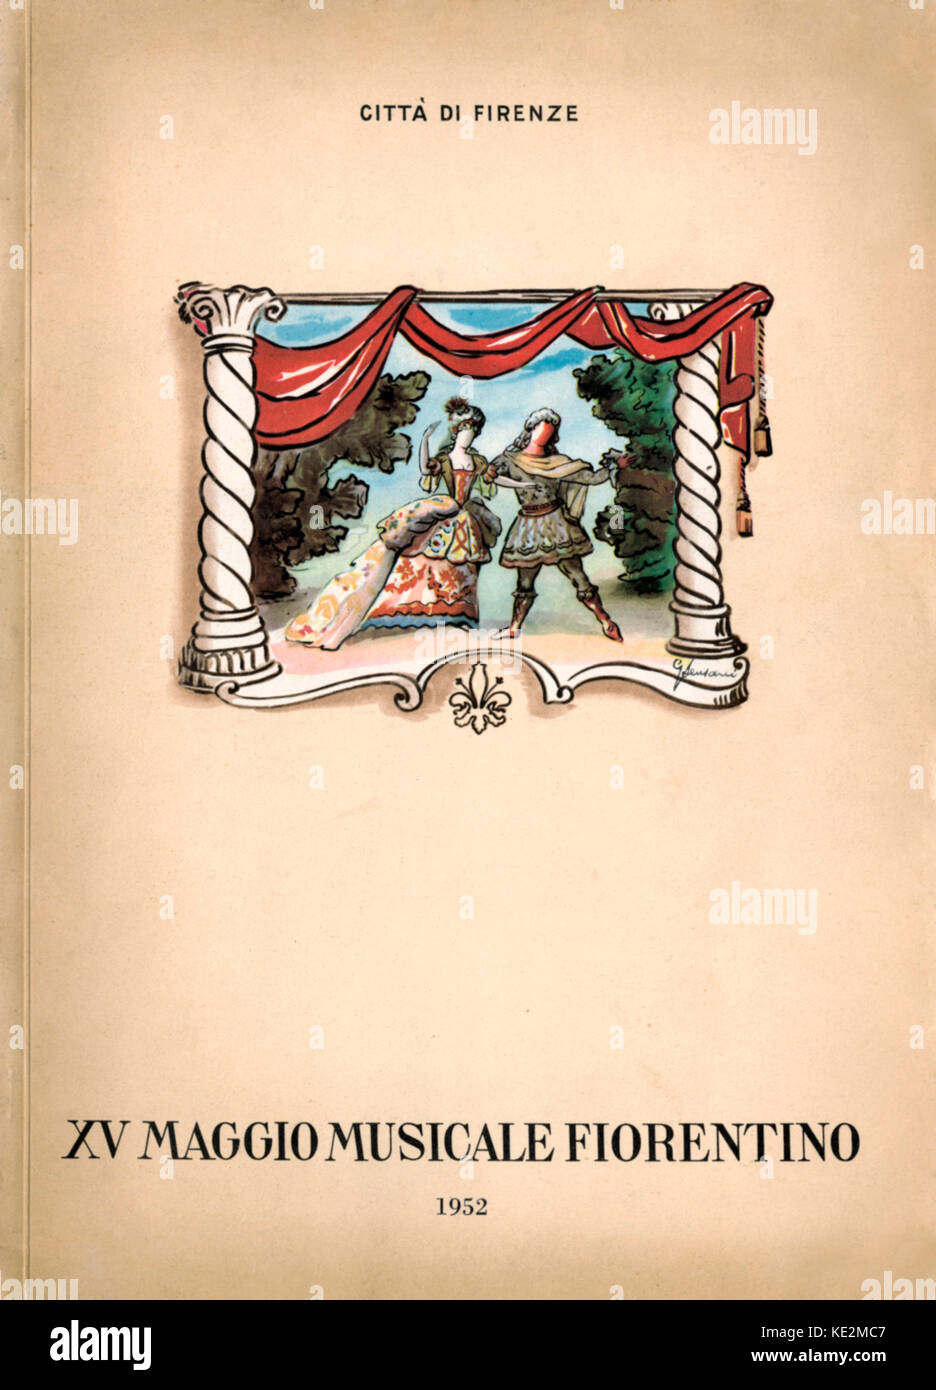 Opera stage design with a performing couple in costume. Programme cover: XV Maggio Musicale Fiorentino, 1952.  Firenze.  Florence. Stock Photo